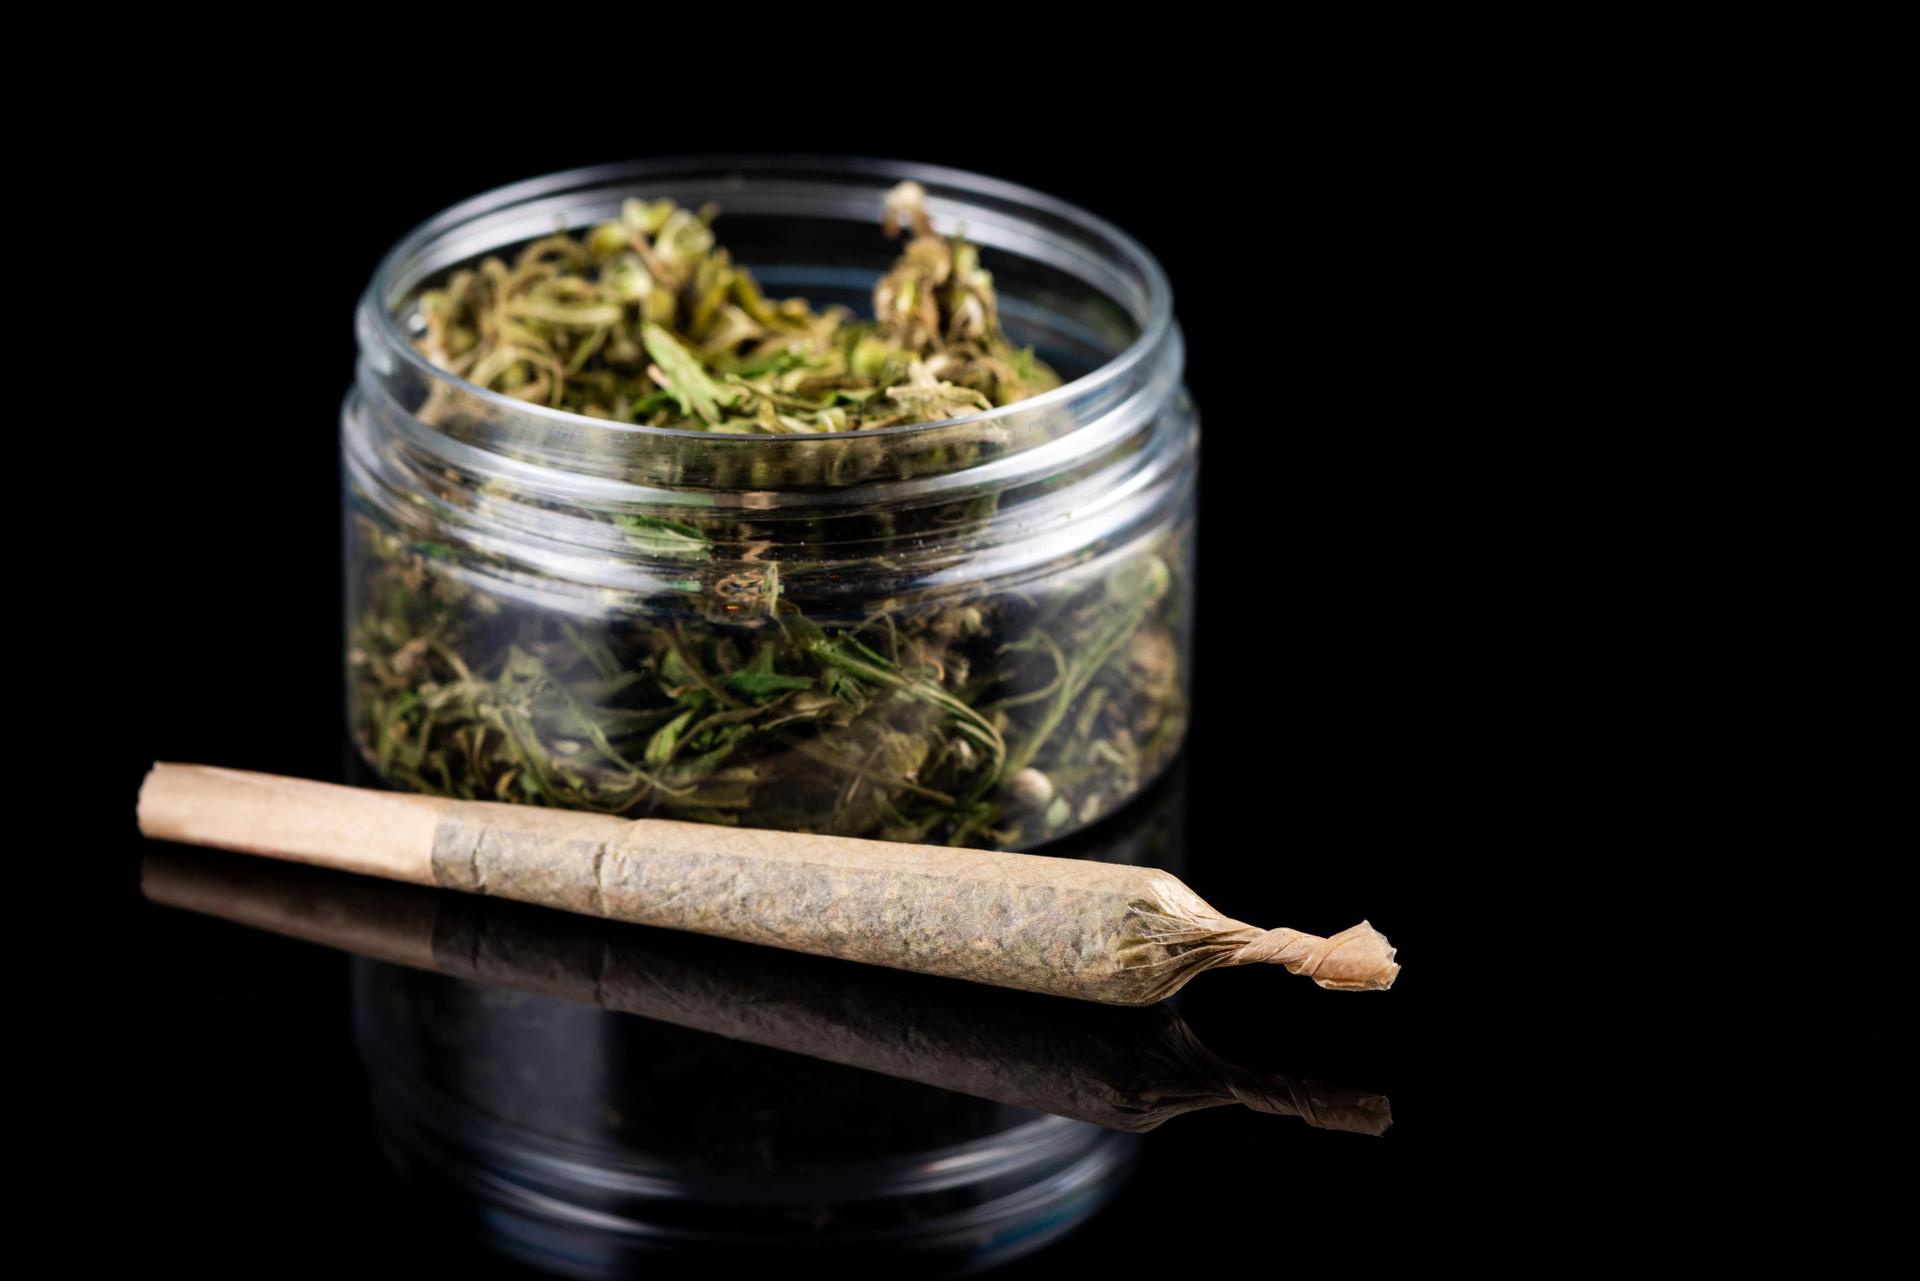 Cannabis in a Jar and a Joint